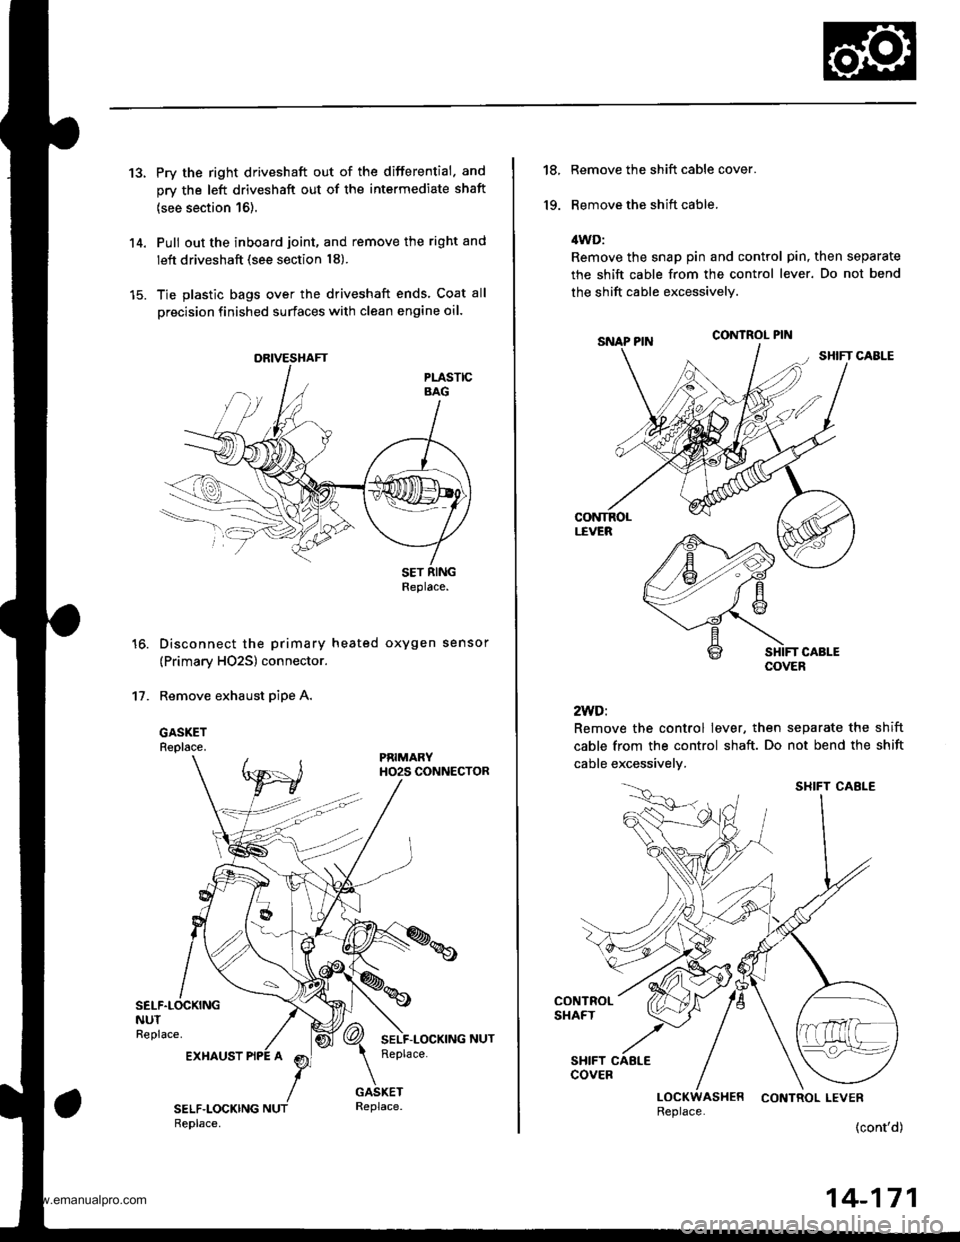 HONDA CR-V 1998 RD1-RD3 / 1.G Owners Manual 
13.Pry the right driveshaft out of the differential. and
orv the left driveshaft out of the intermediate shaft
{see section 16).
Pull out the inboard joint, and remove the right and
left driveshaft (